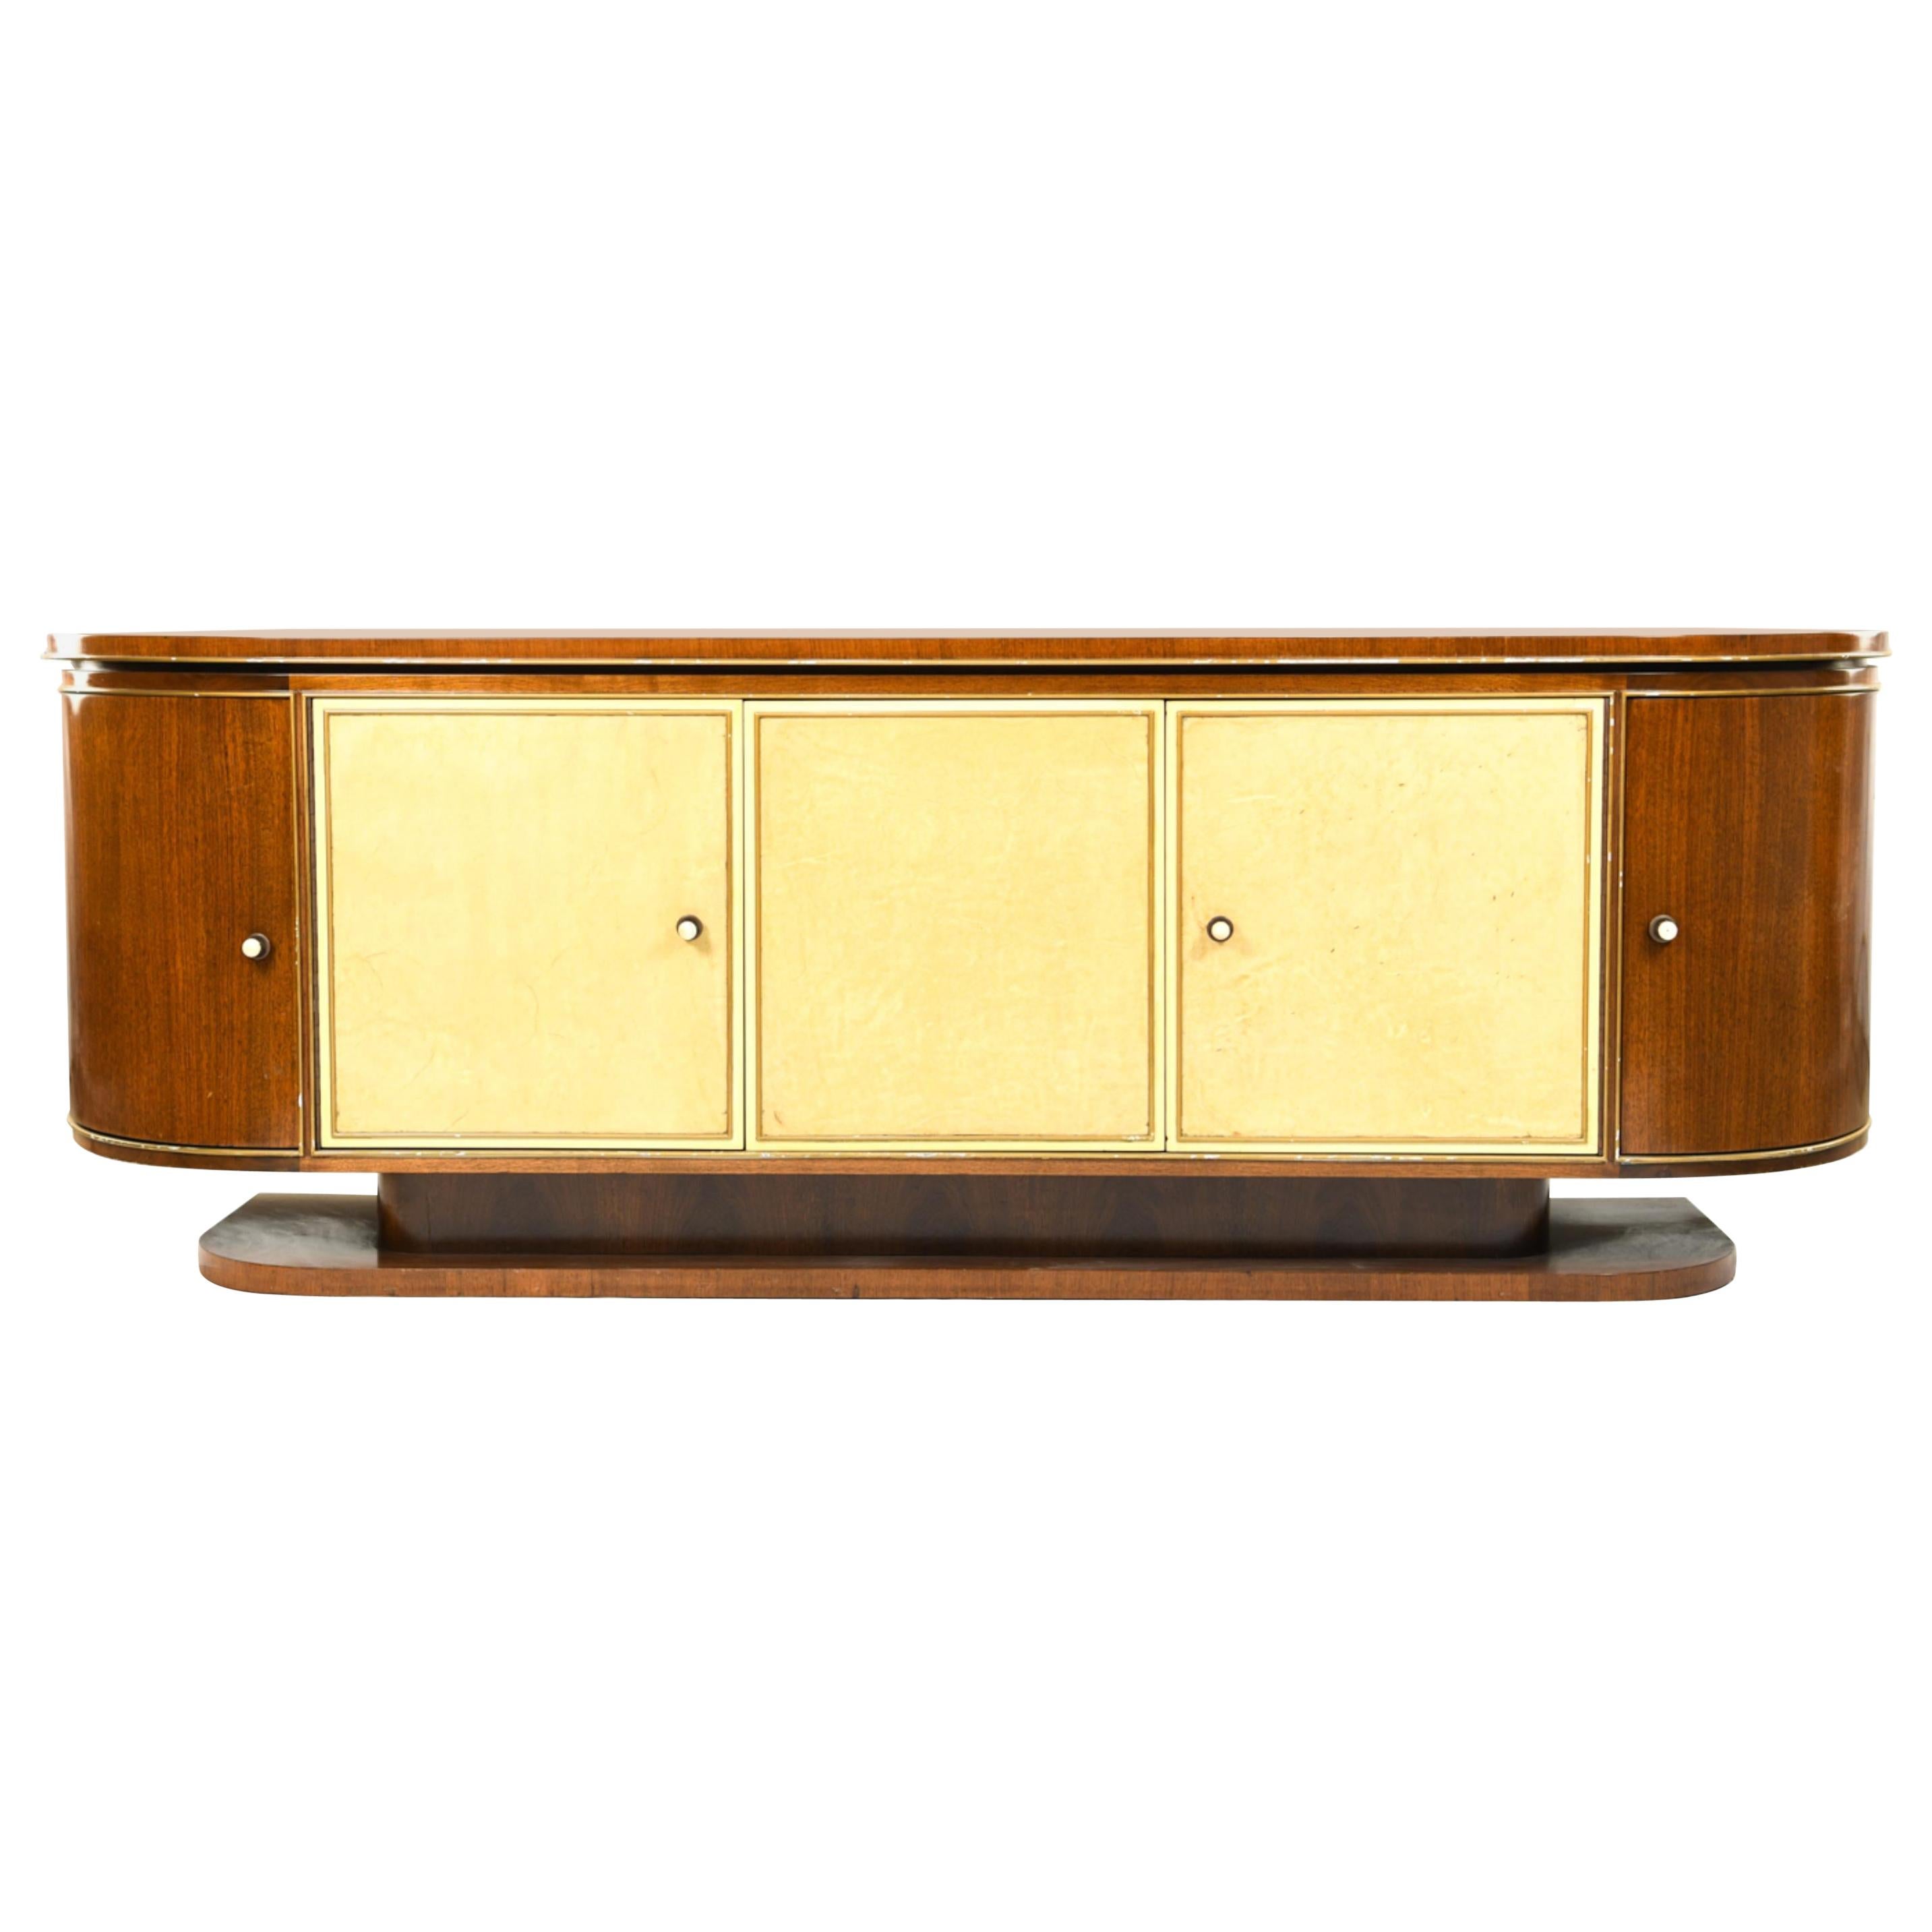 French Art Deco Sideboard, Mahogany, Beige Parchment, Lacquer, France, 1940s For Sale